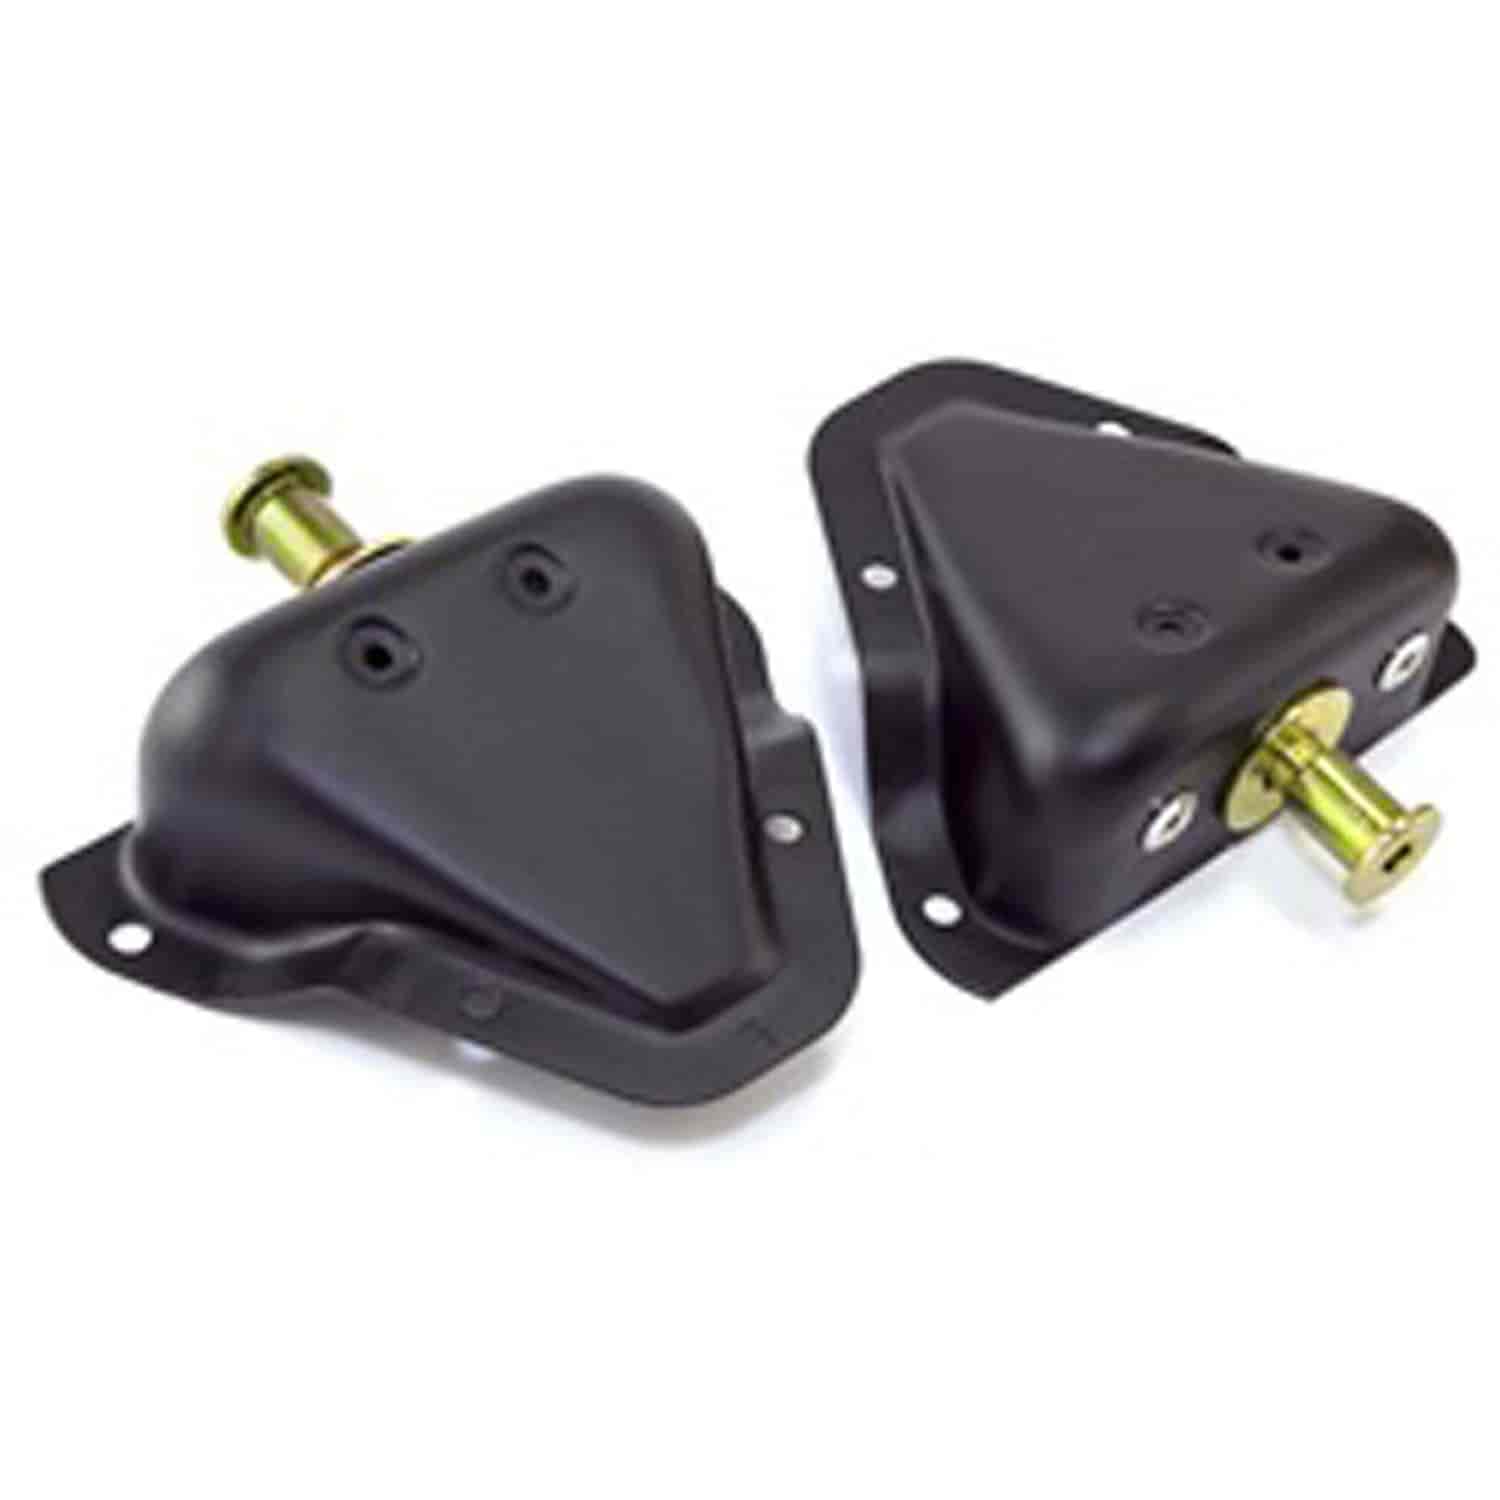 pair of replacement door latch striker brackets from Omix-ADA, Fits 81-86 Jeep CJ7 and 87-95 Wrangler with a hardtop.